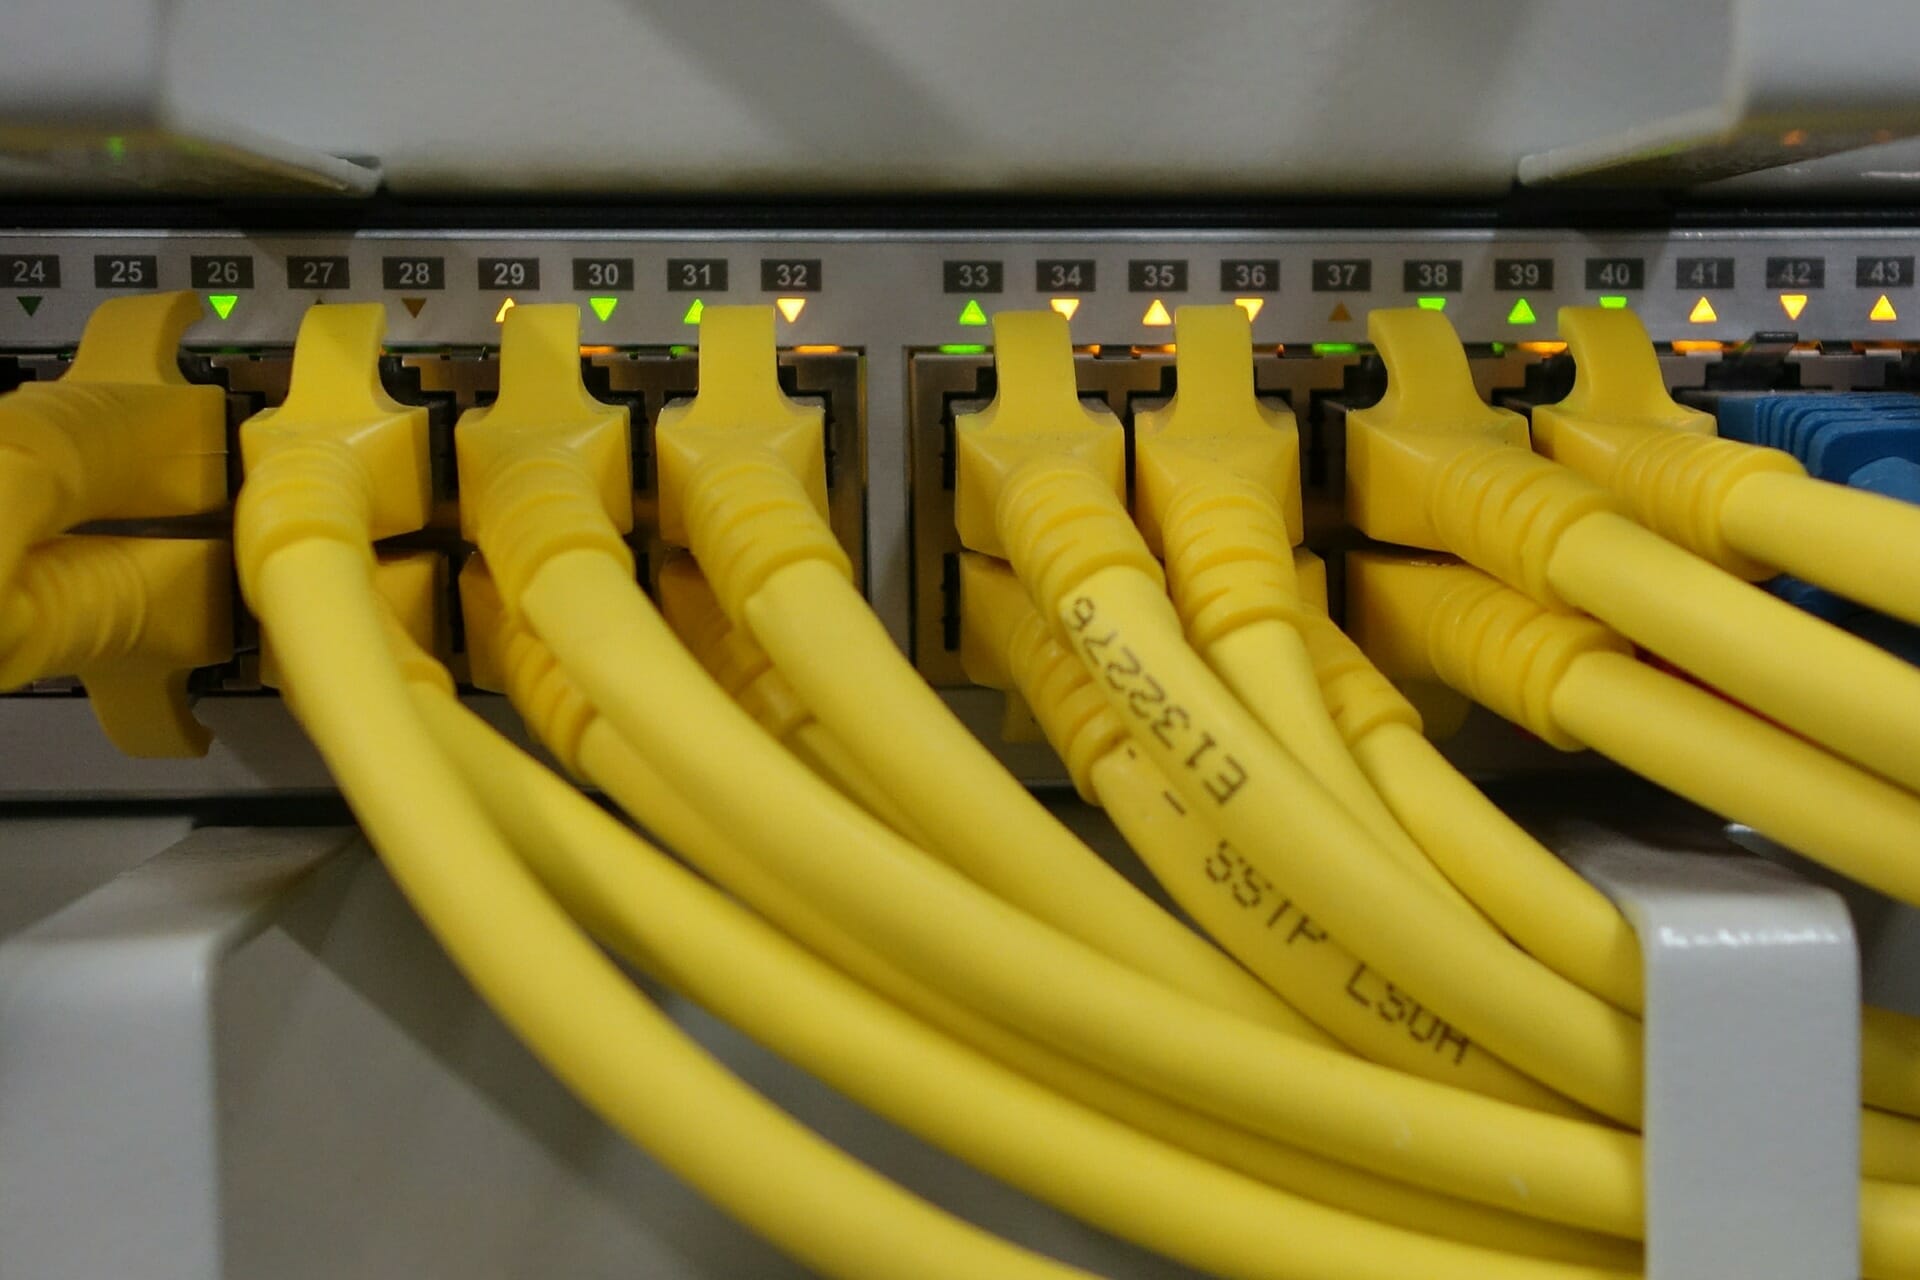 Maryland structured cabling network company